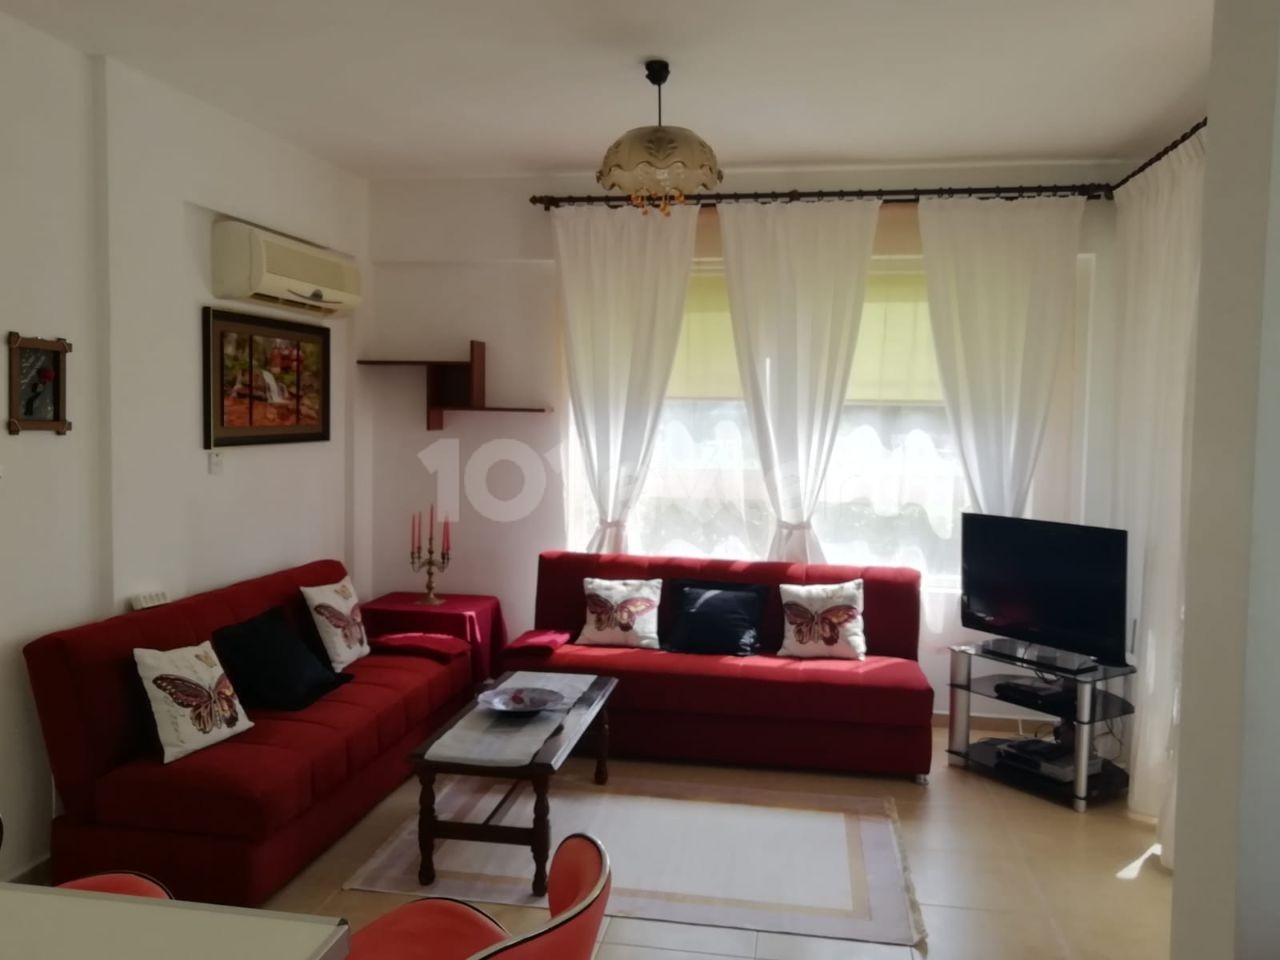 Kyrenia - Esentepe, furnished, 2+1 flat with white goods and private garden. It is 300 meters from the sea. We can speak Turkish, English and Russian.